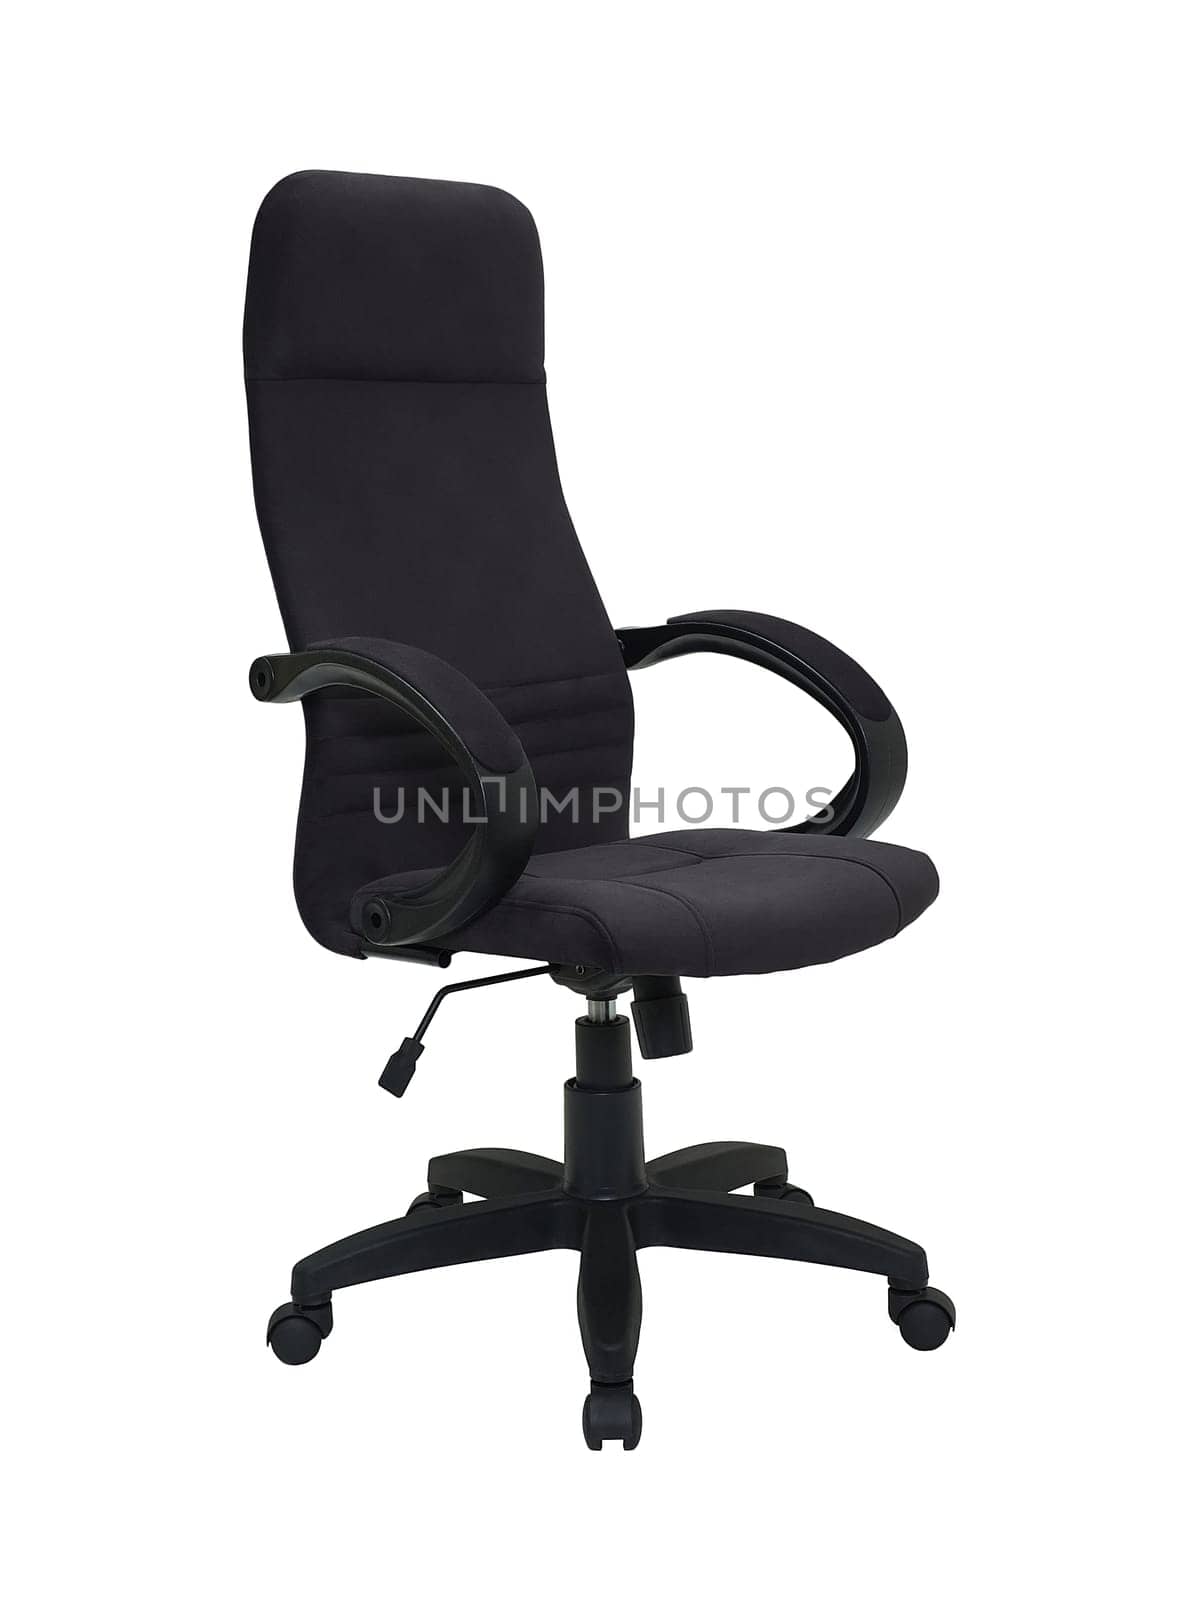 black fabric armchair on wheels isolated on white background, side view. modern furniture in minimal style, interior, home design